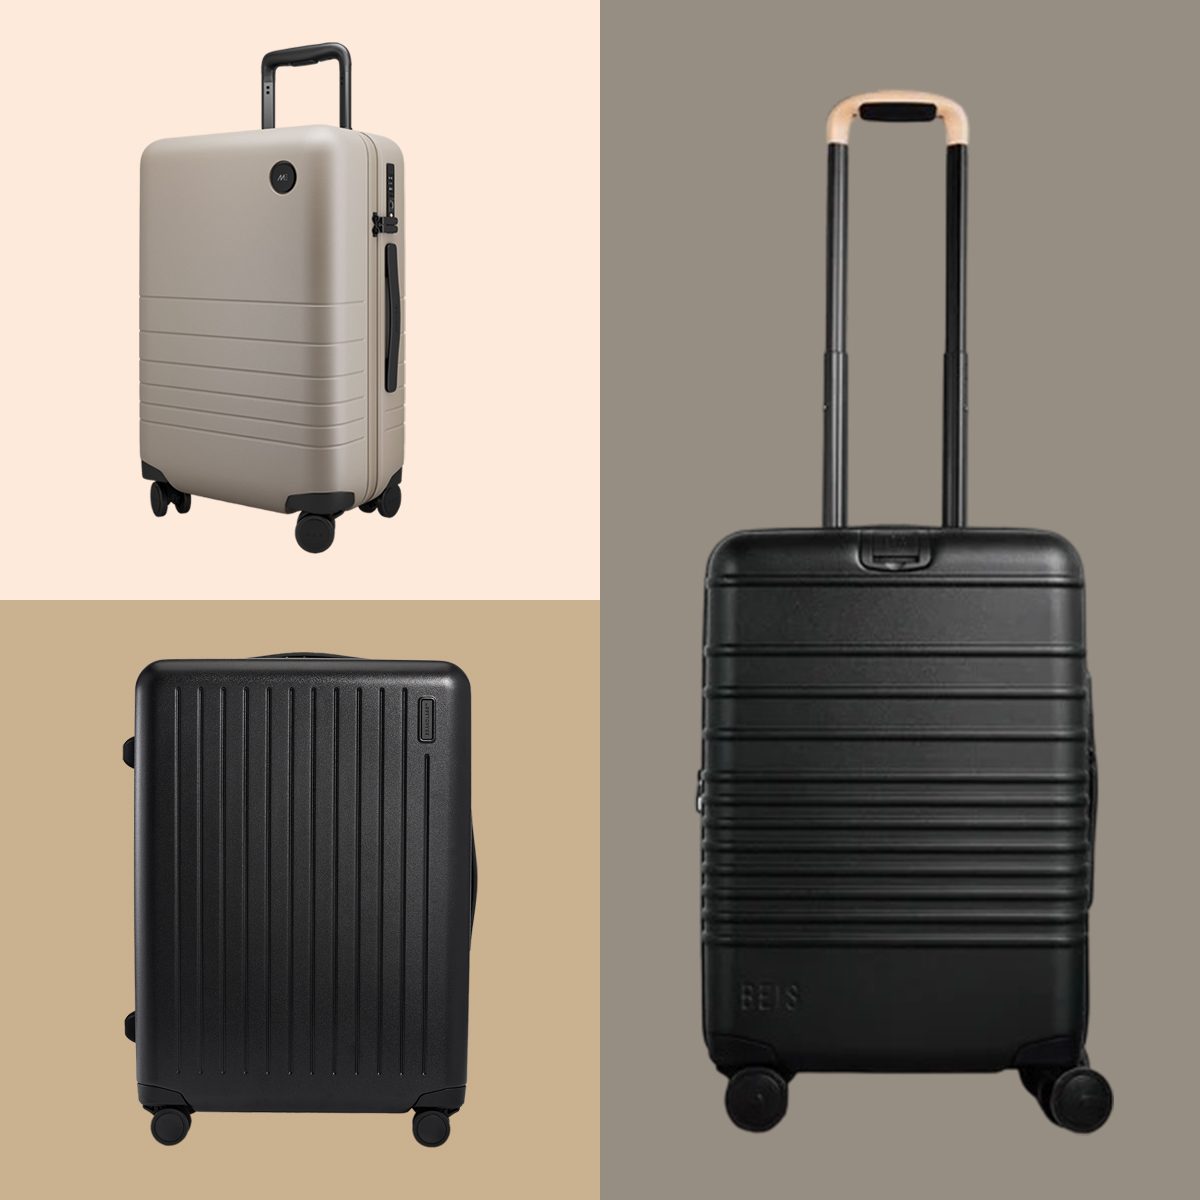 8 Top-Rated Luggage Sets for Elevated Travel Experience